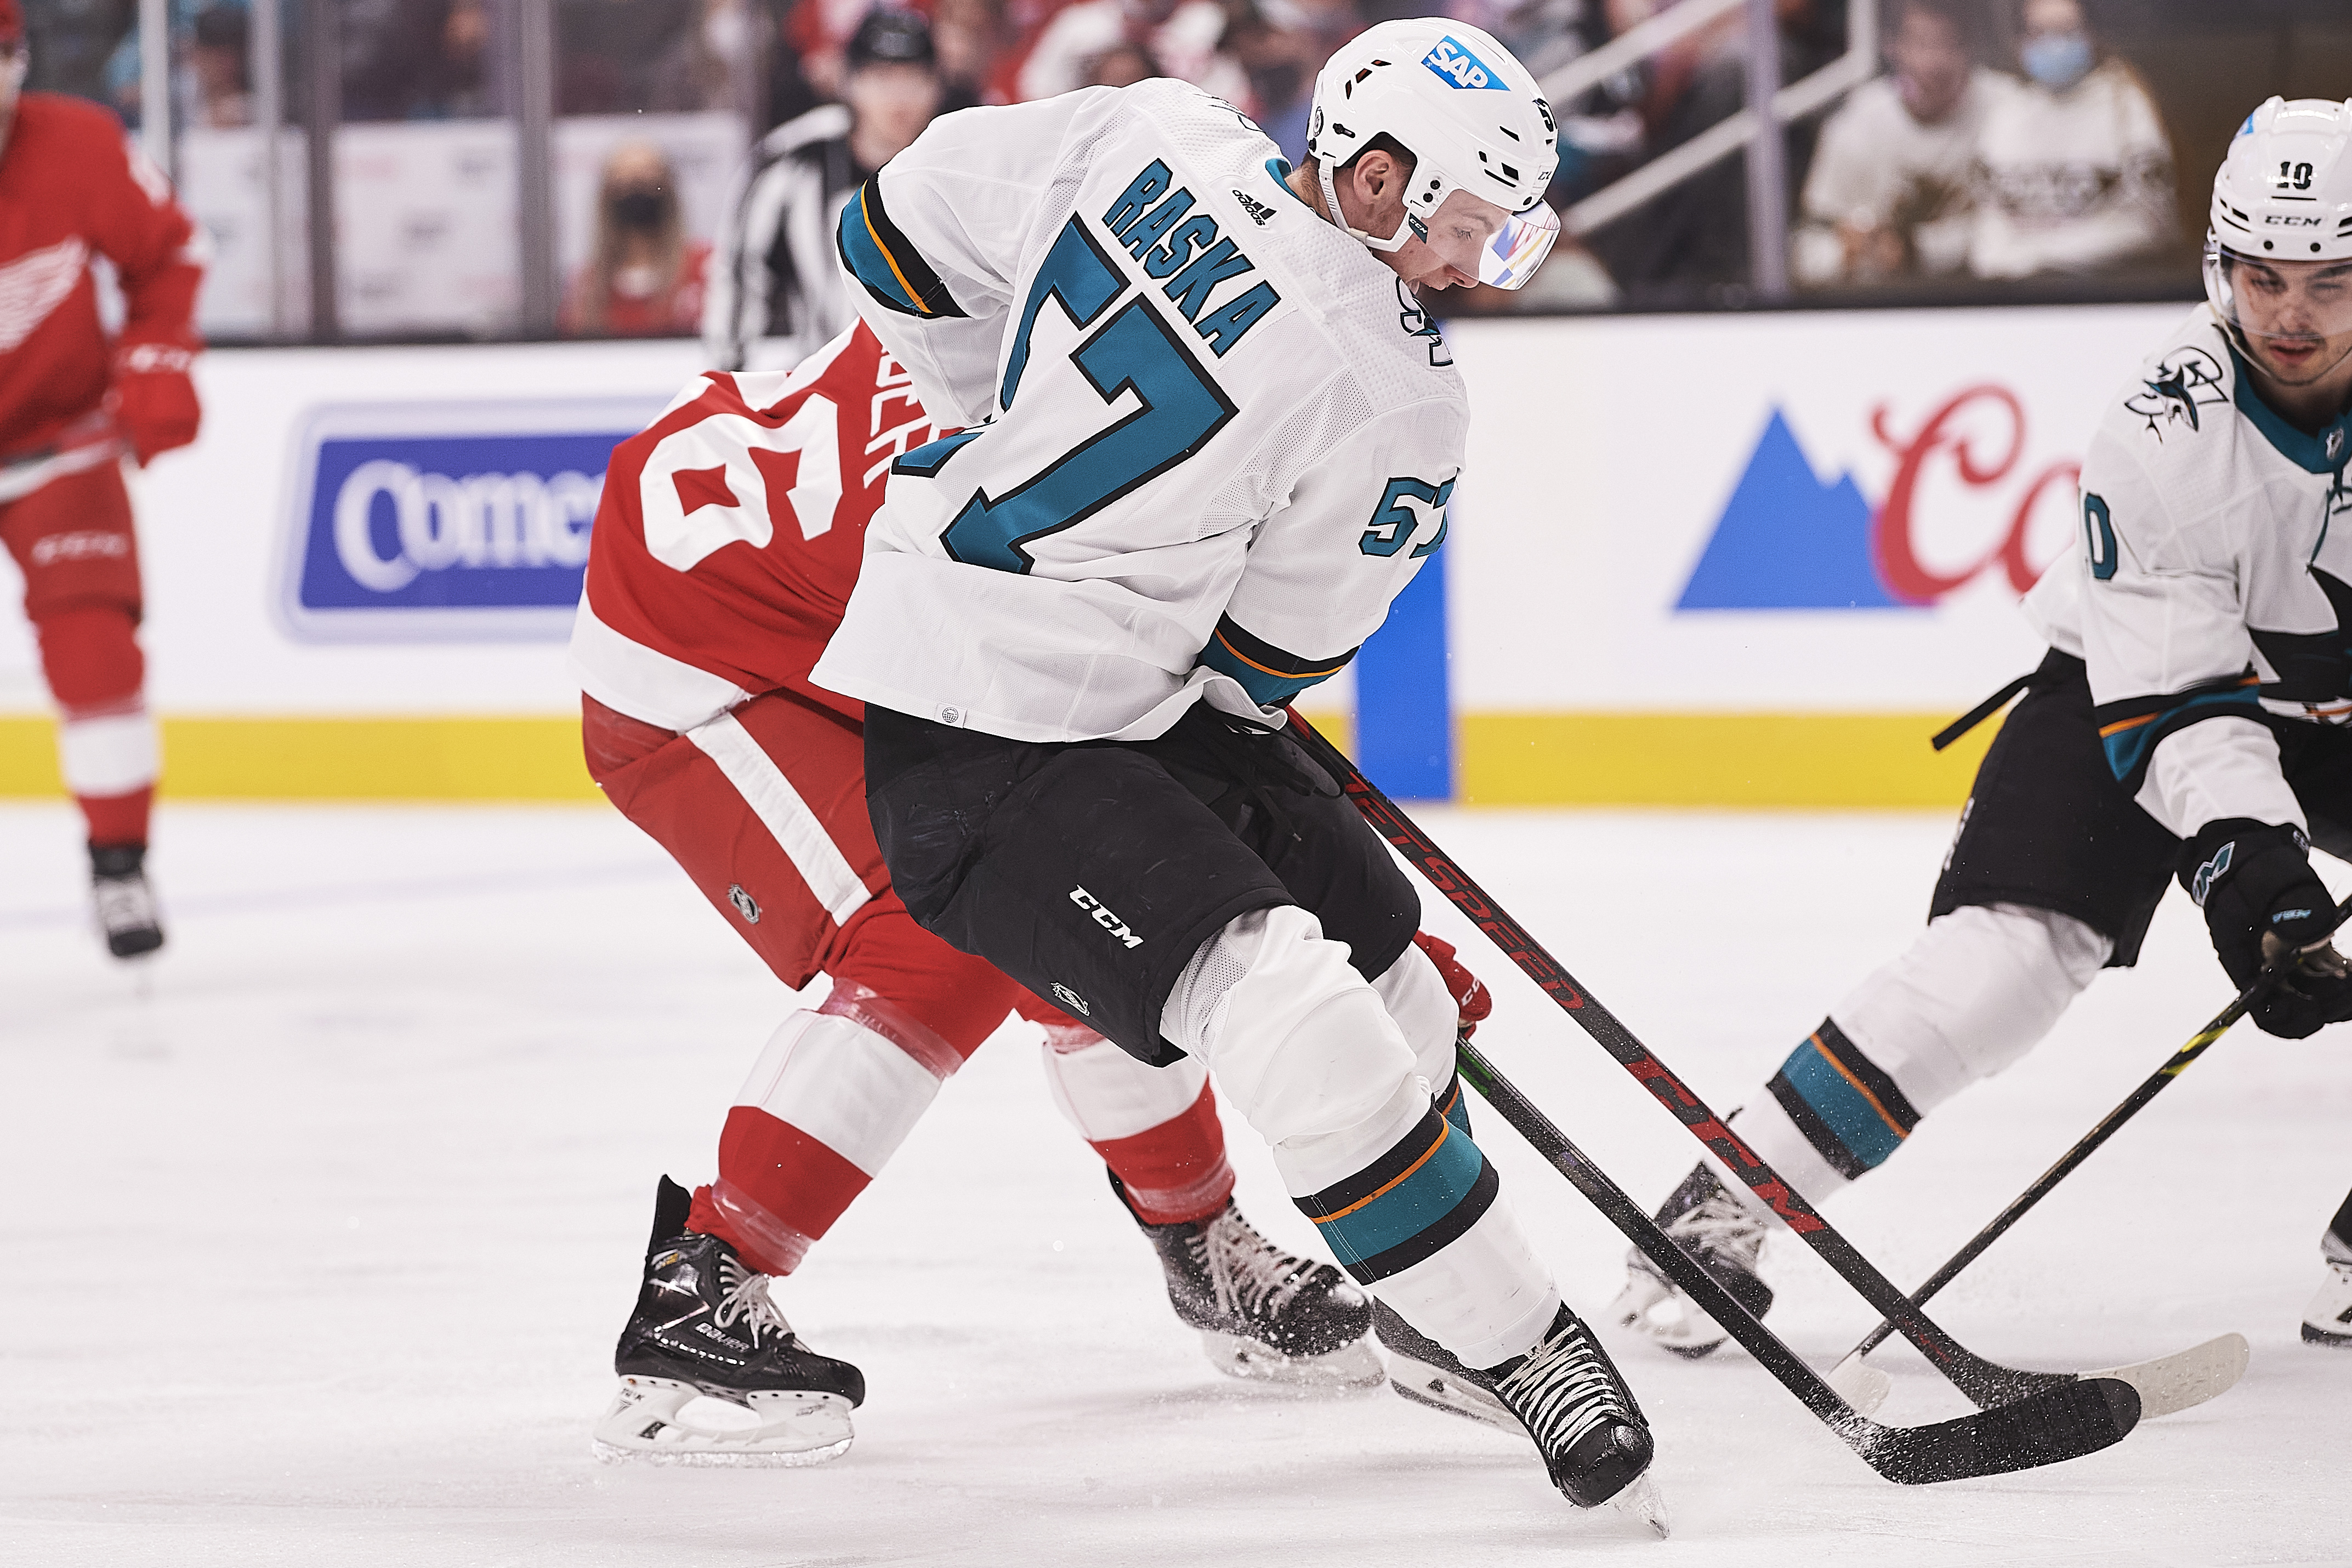 San Jose Sharks right wing Adam Raska (57) fights for the puck during the NHL game between the San Jose Sharks and the Detroit Red Wings on January 11, 2022 at SAP Center in San Jose, CA.